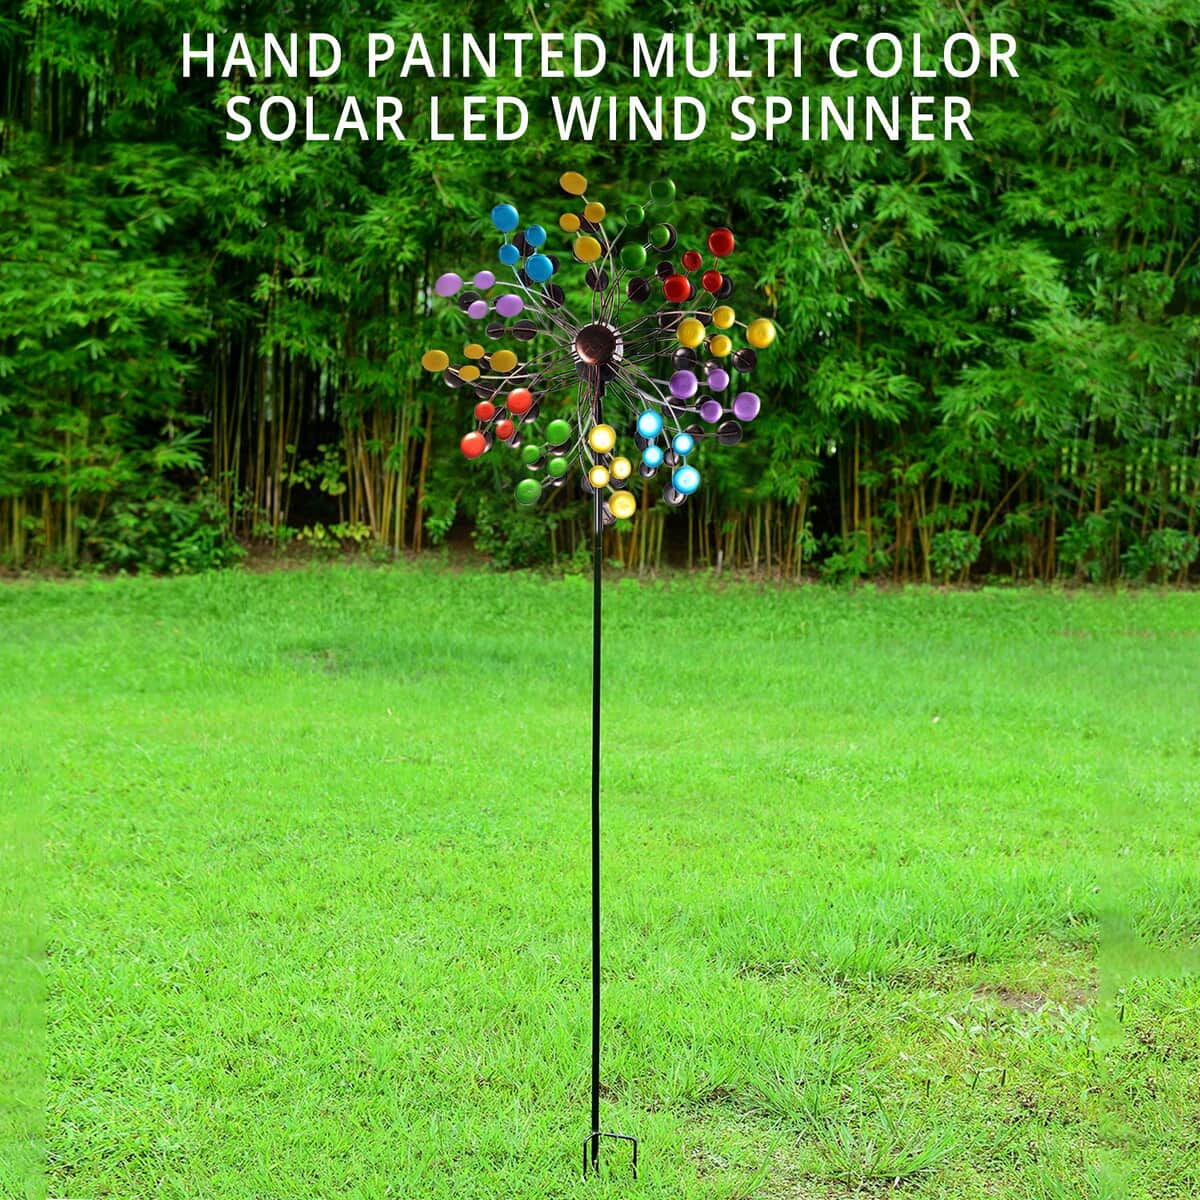 Hand Painted Multi Color Circles Solar LED Wind Spinner -Adjustable Height up to 70 Inches image number 1